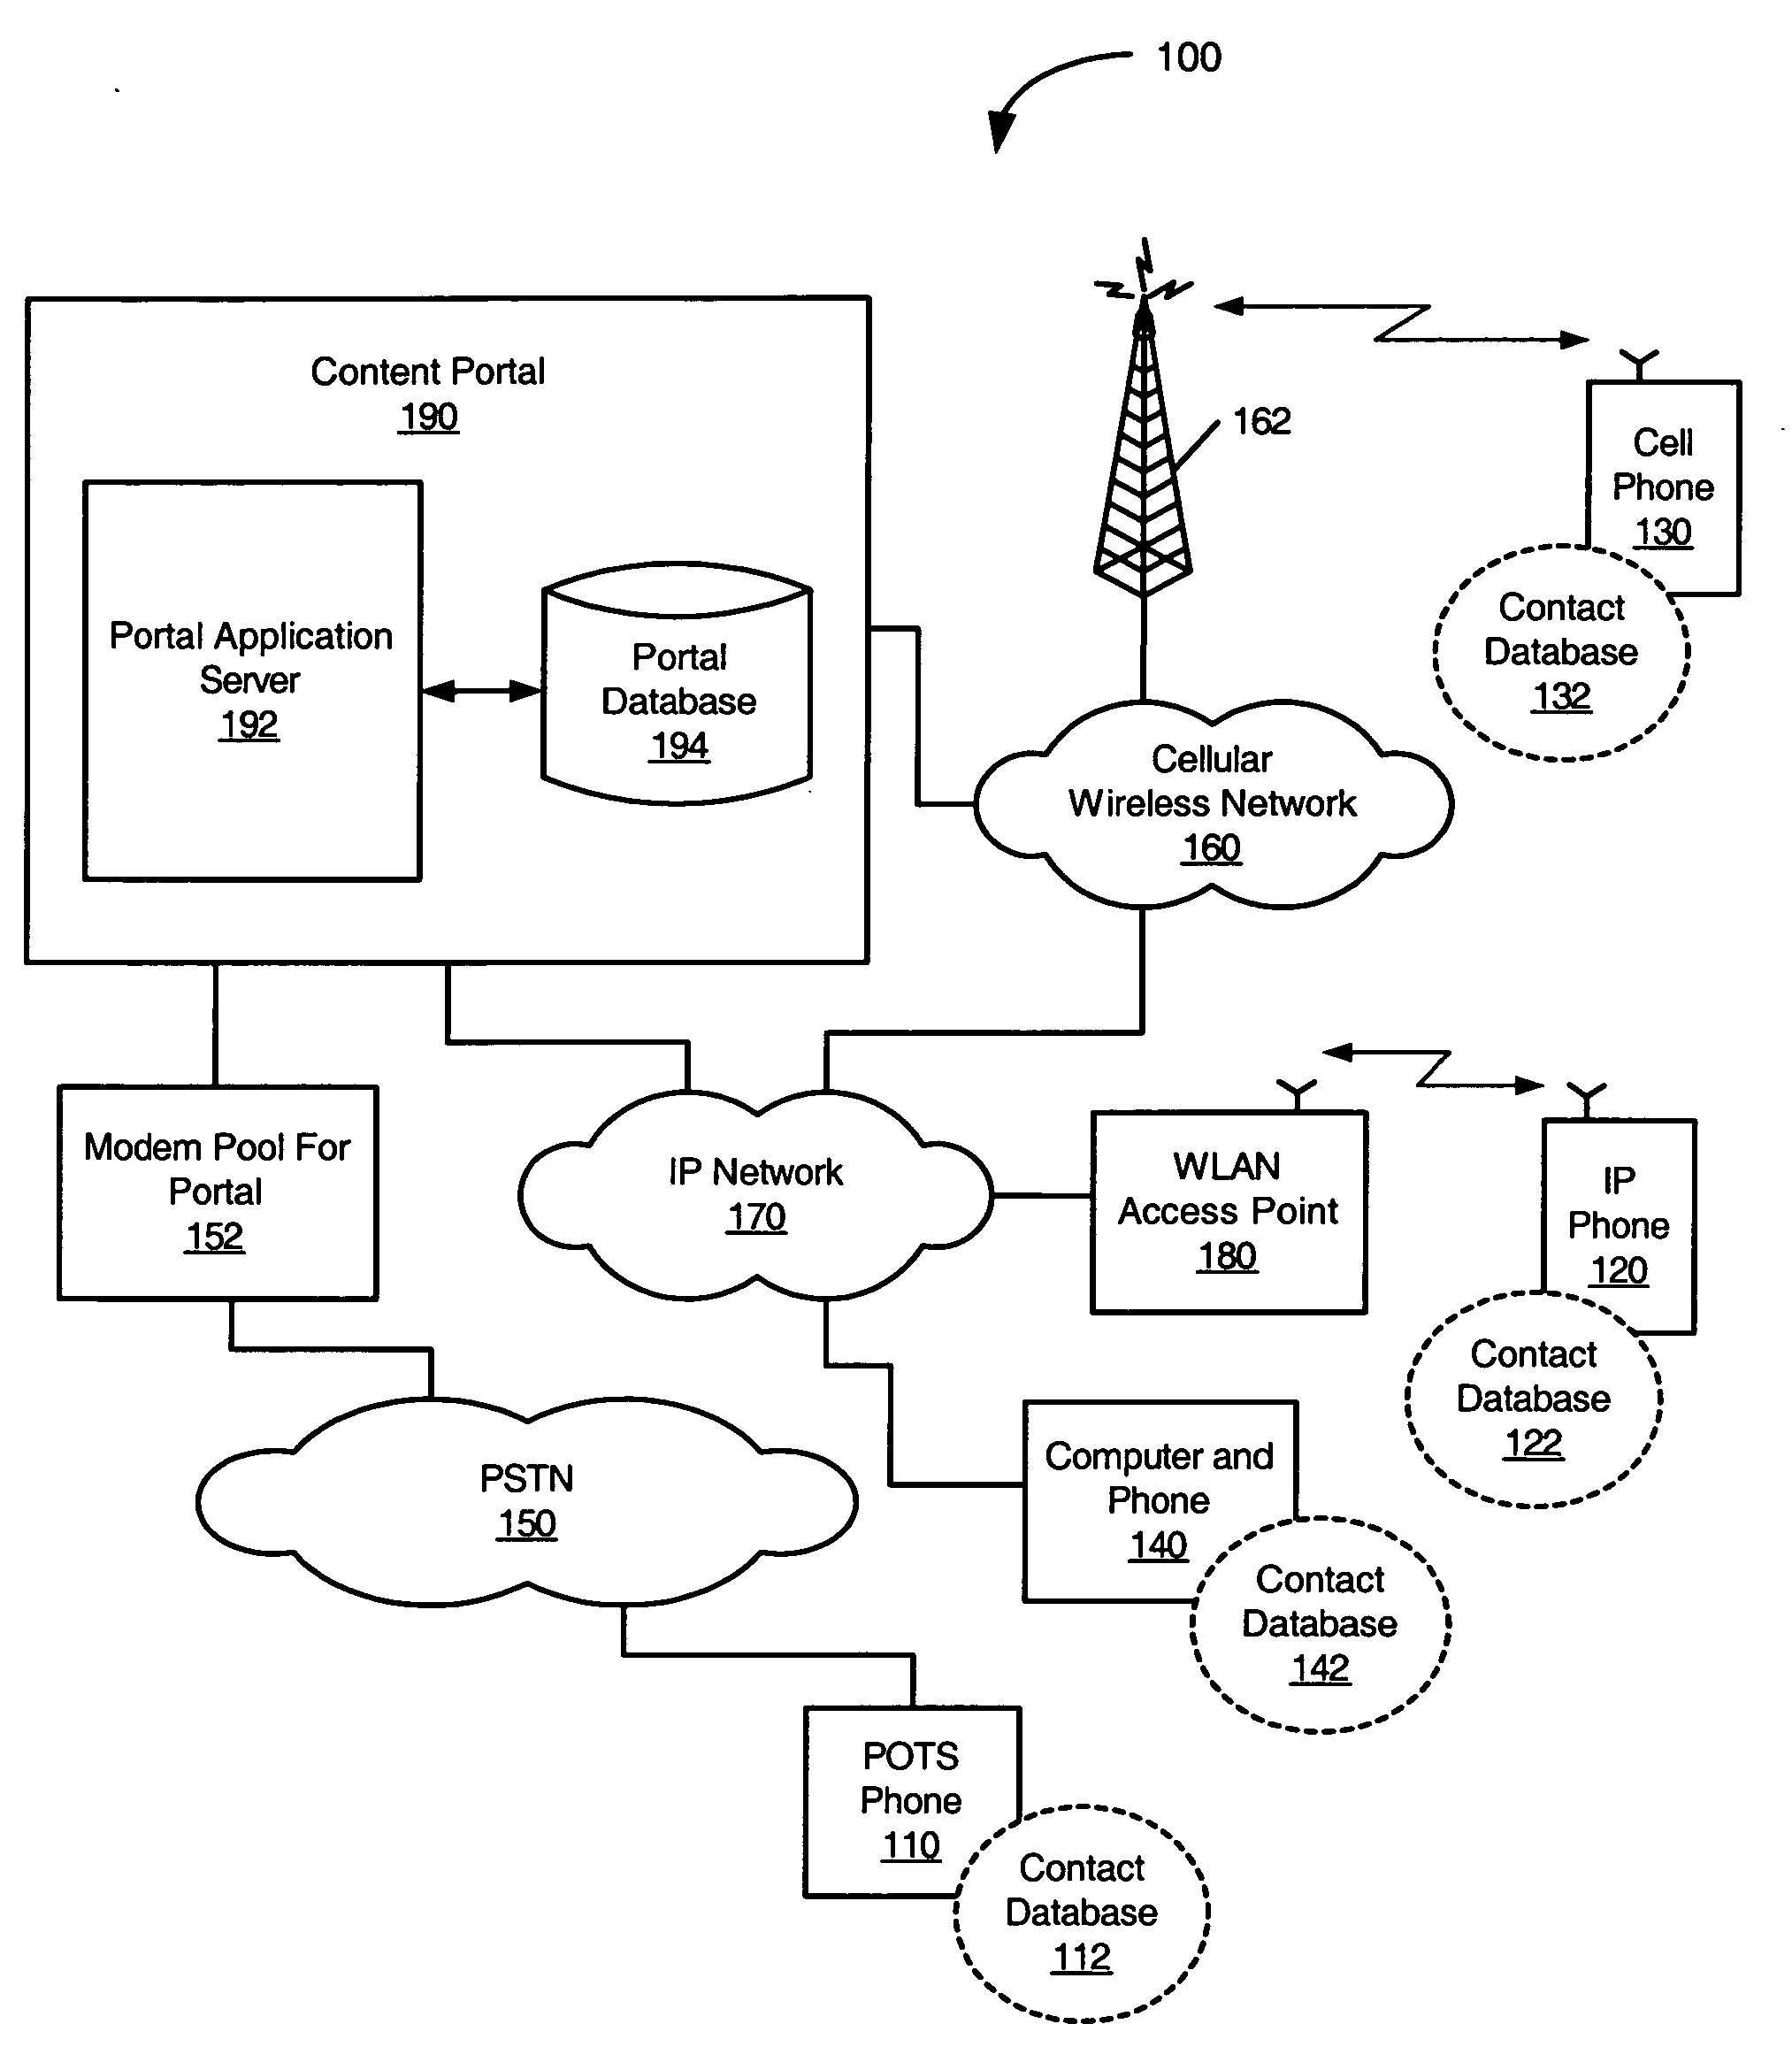 Synchronization of client application data between pots telephone and content portal through PSTN